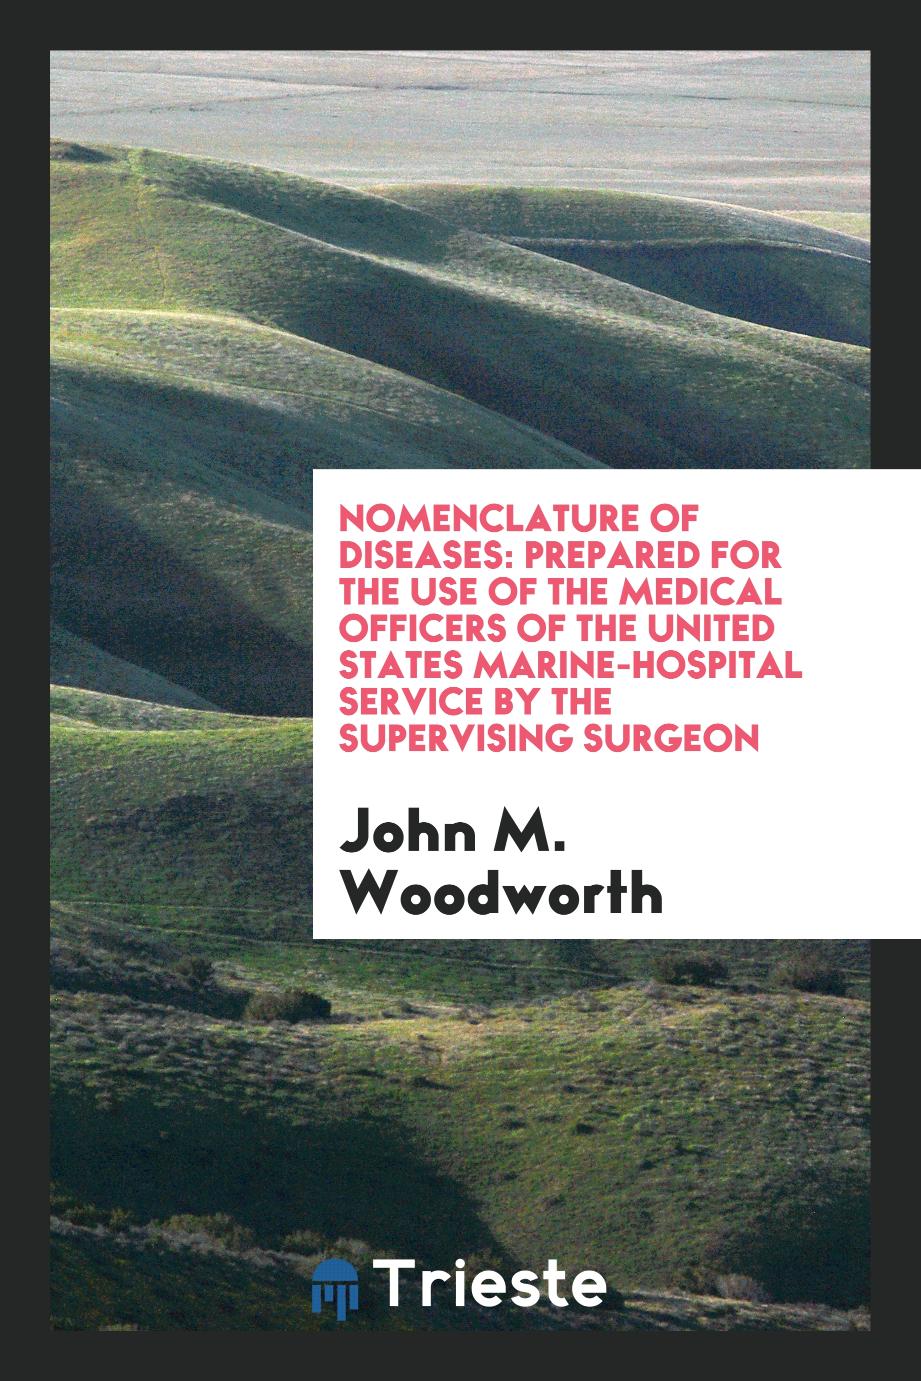 Nomenclature of Diseases: Prepared for the Use of the Medical Officers of the United States Marine-Hospital Service by the Supervising Surgeon